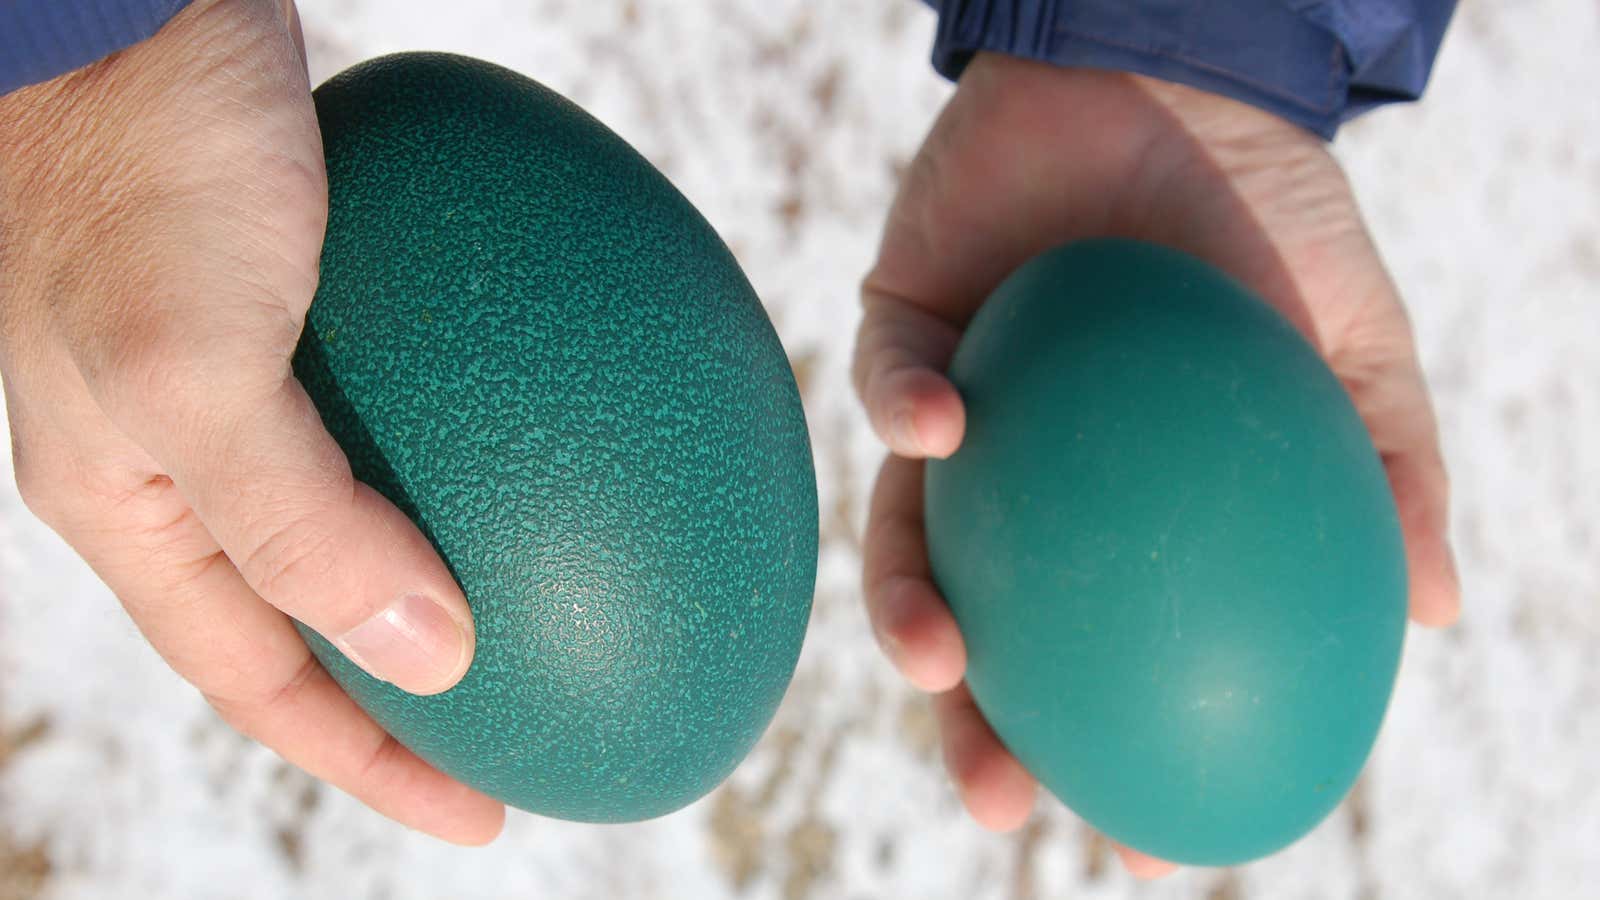 Emus, their eggs shown above, can reach almost 90 pounds. Recent research suggests that 50,000 years ago, humans helped drive a 500-pound Australian bird into extinction by eating its eggs.